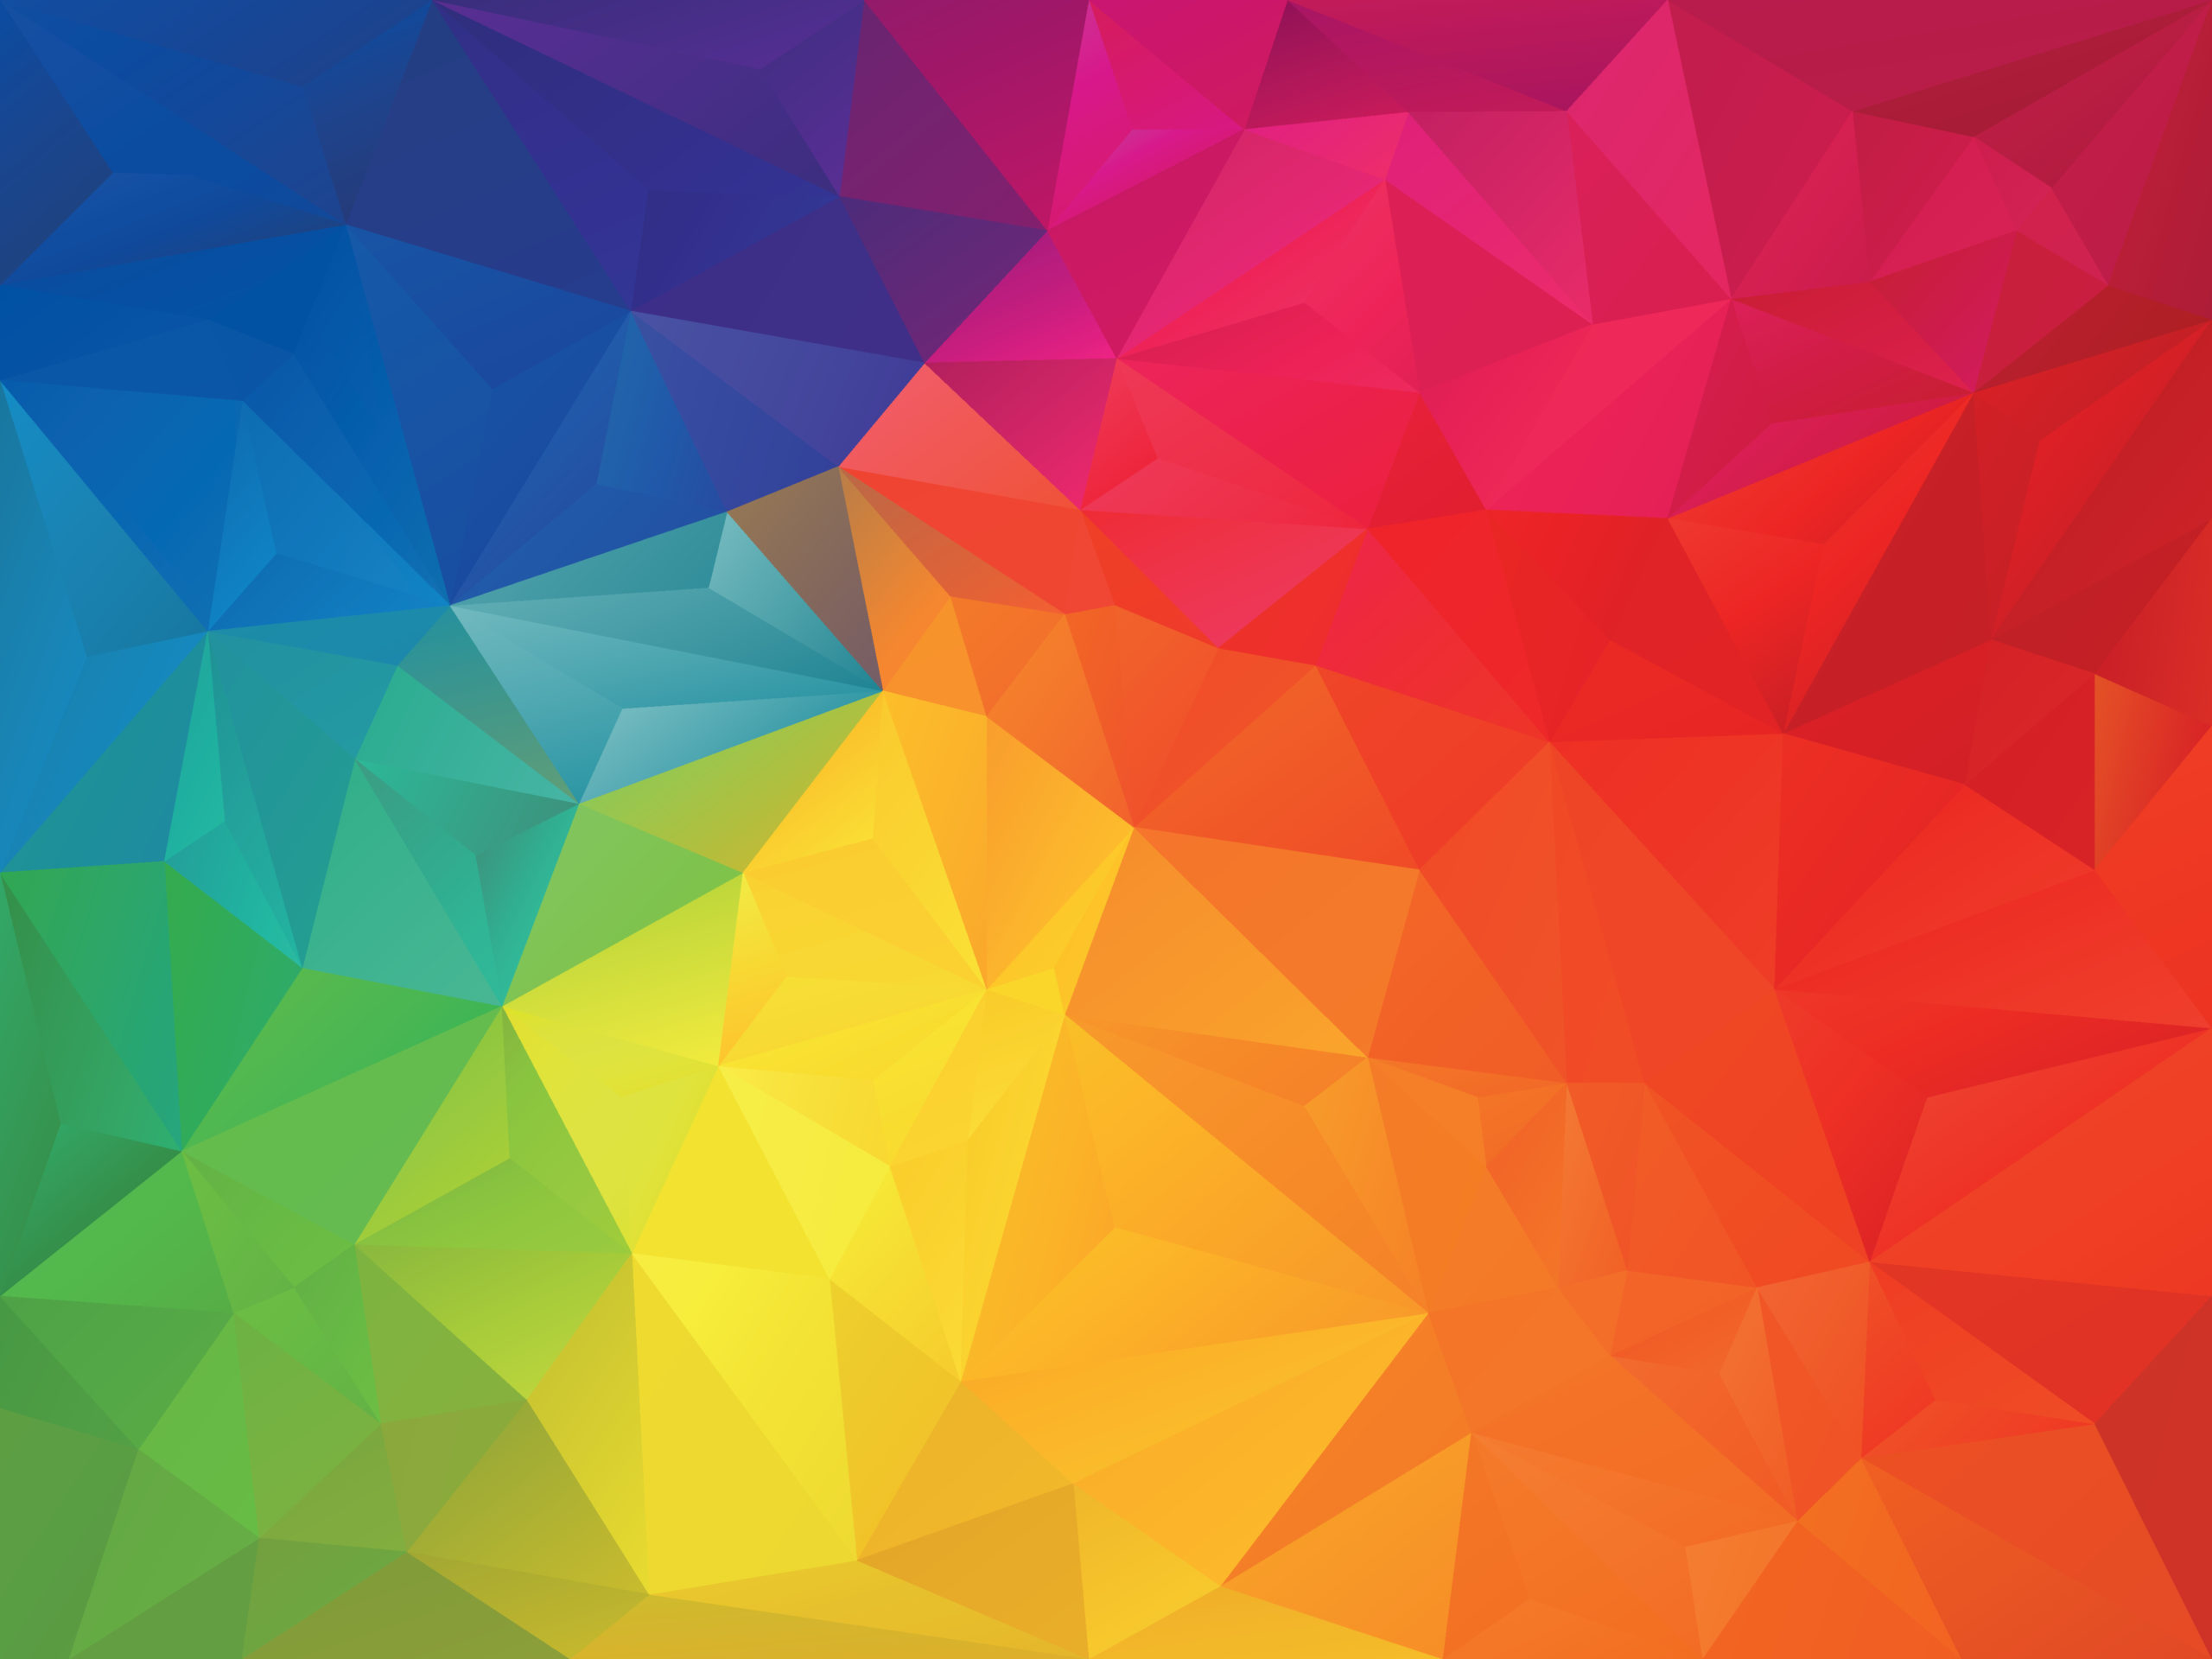 Event Design: Color Theory and Visual Thinking